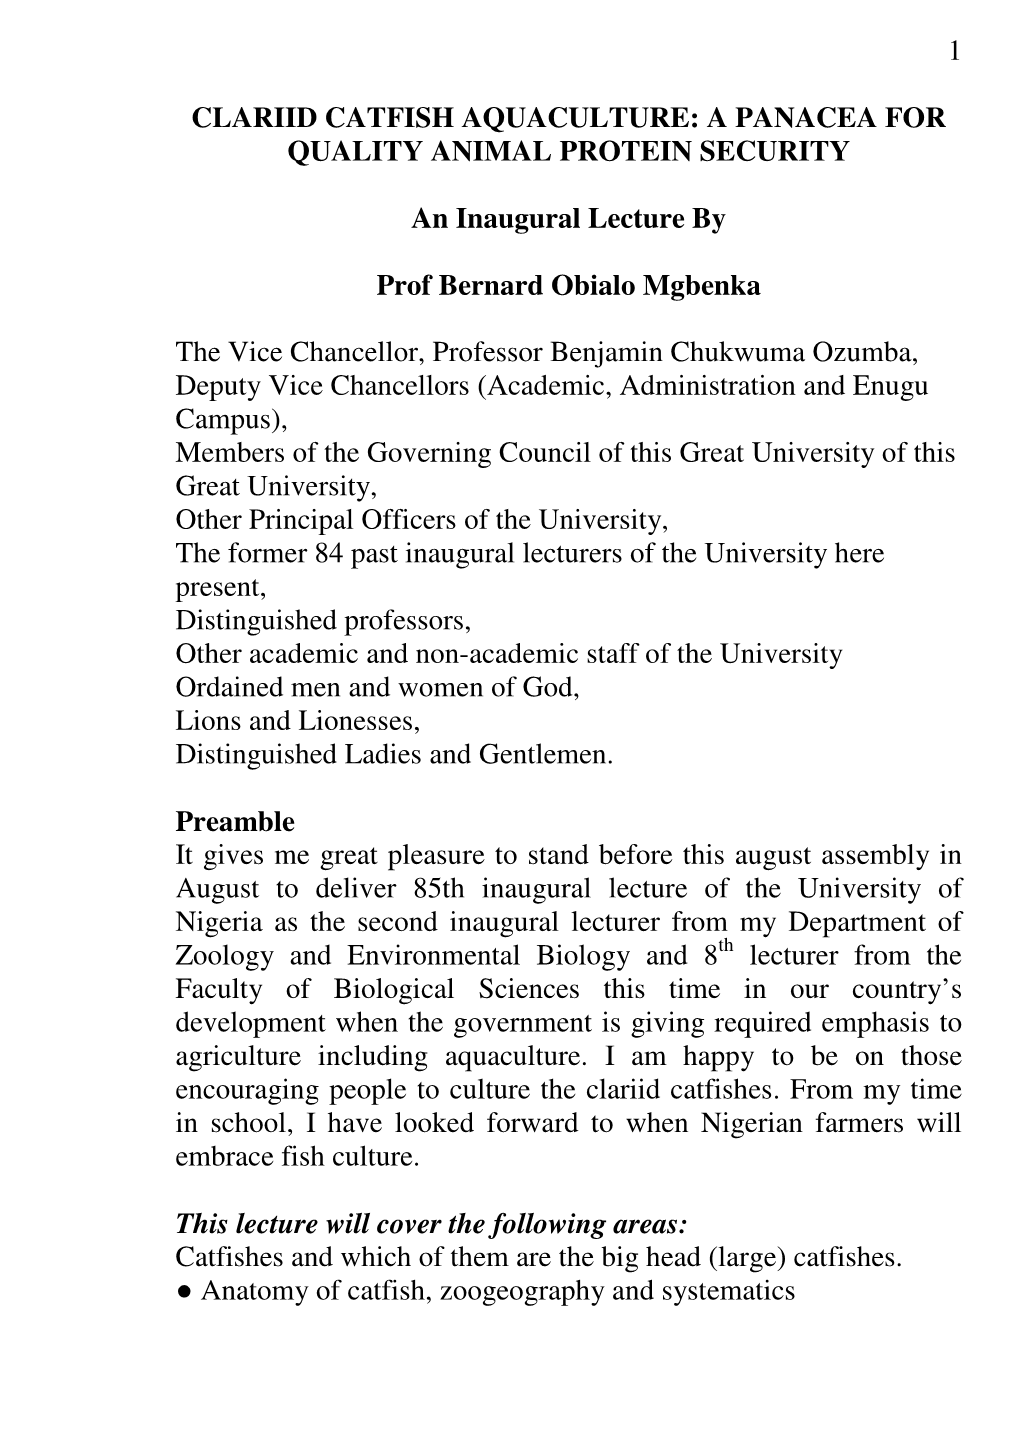 1 CLARIID CATFISH AQUACULTURE: a PANACEA for QUALITY ANIMAL PROTEIN SECURITY an Inaugural Lecture by Prof Bernard Obialo Mgbenka